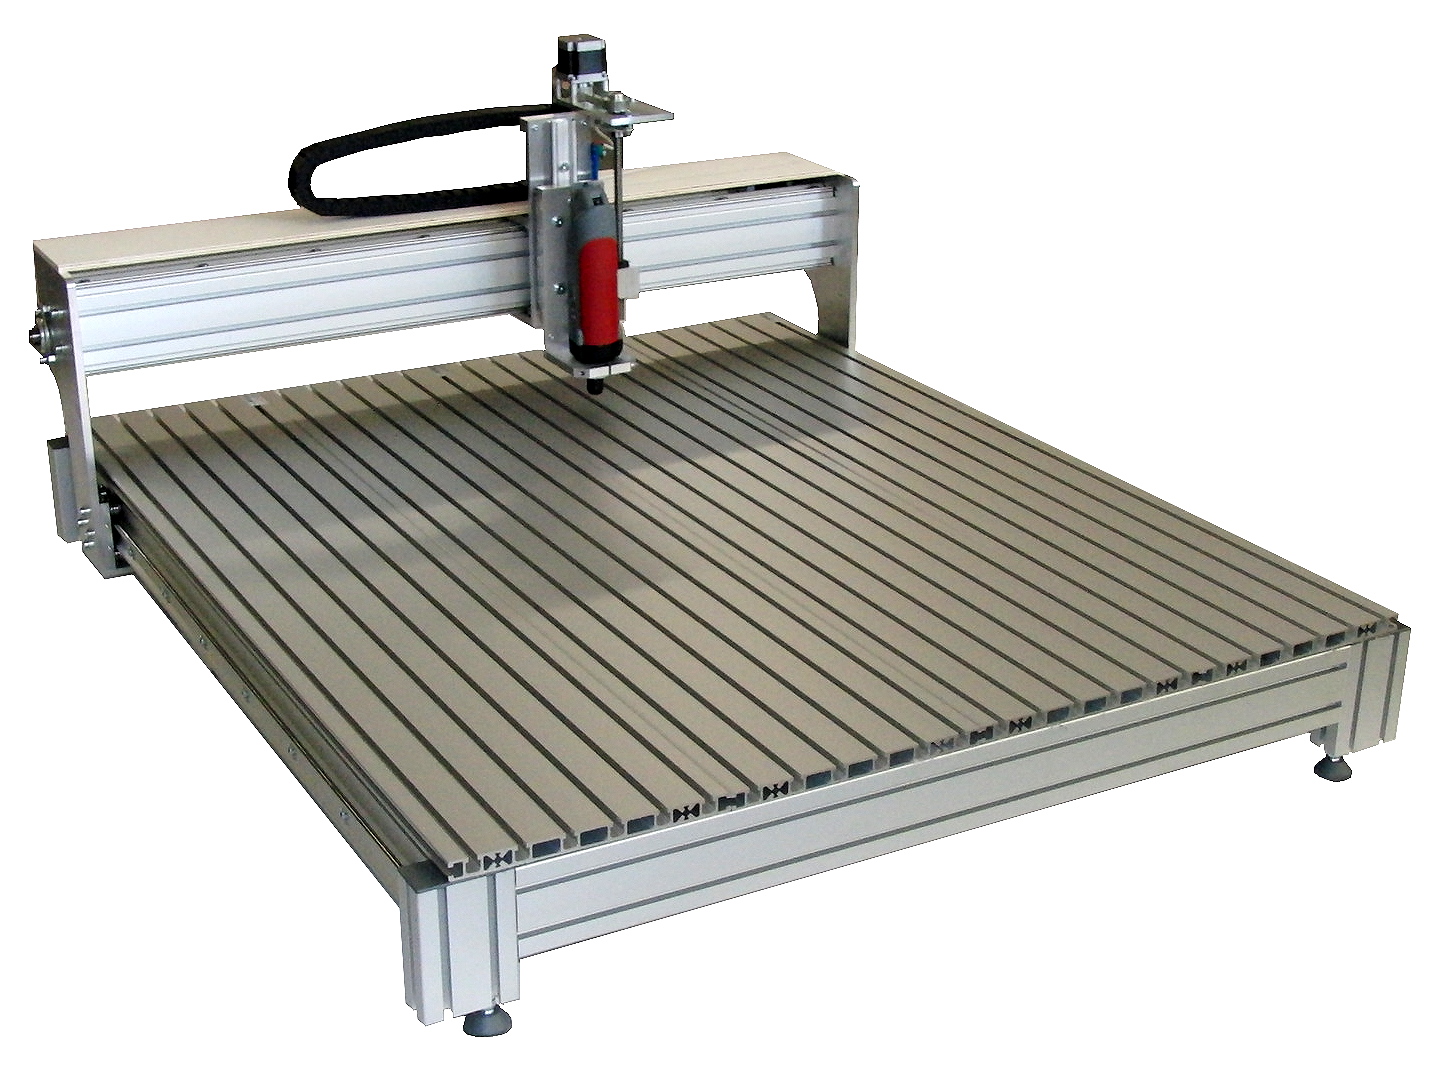 T-Grooved Table Pro Basic/Vario 20-10 2400mm x 1080mm